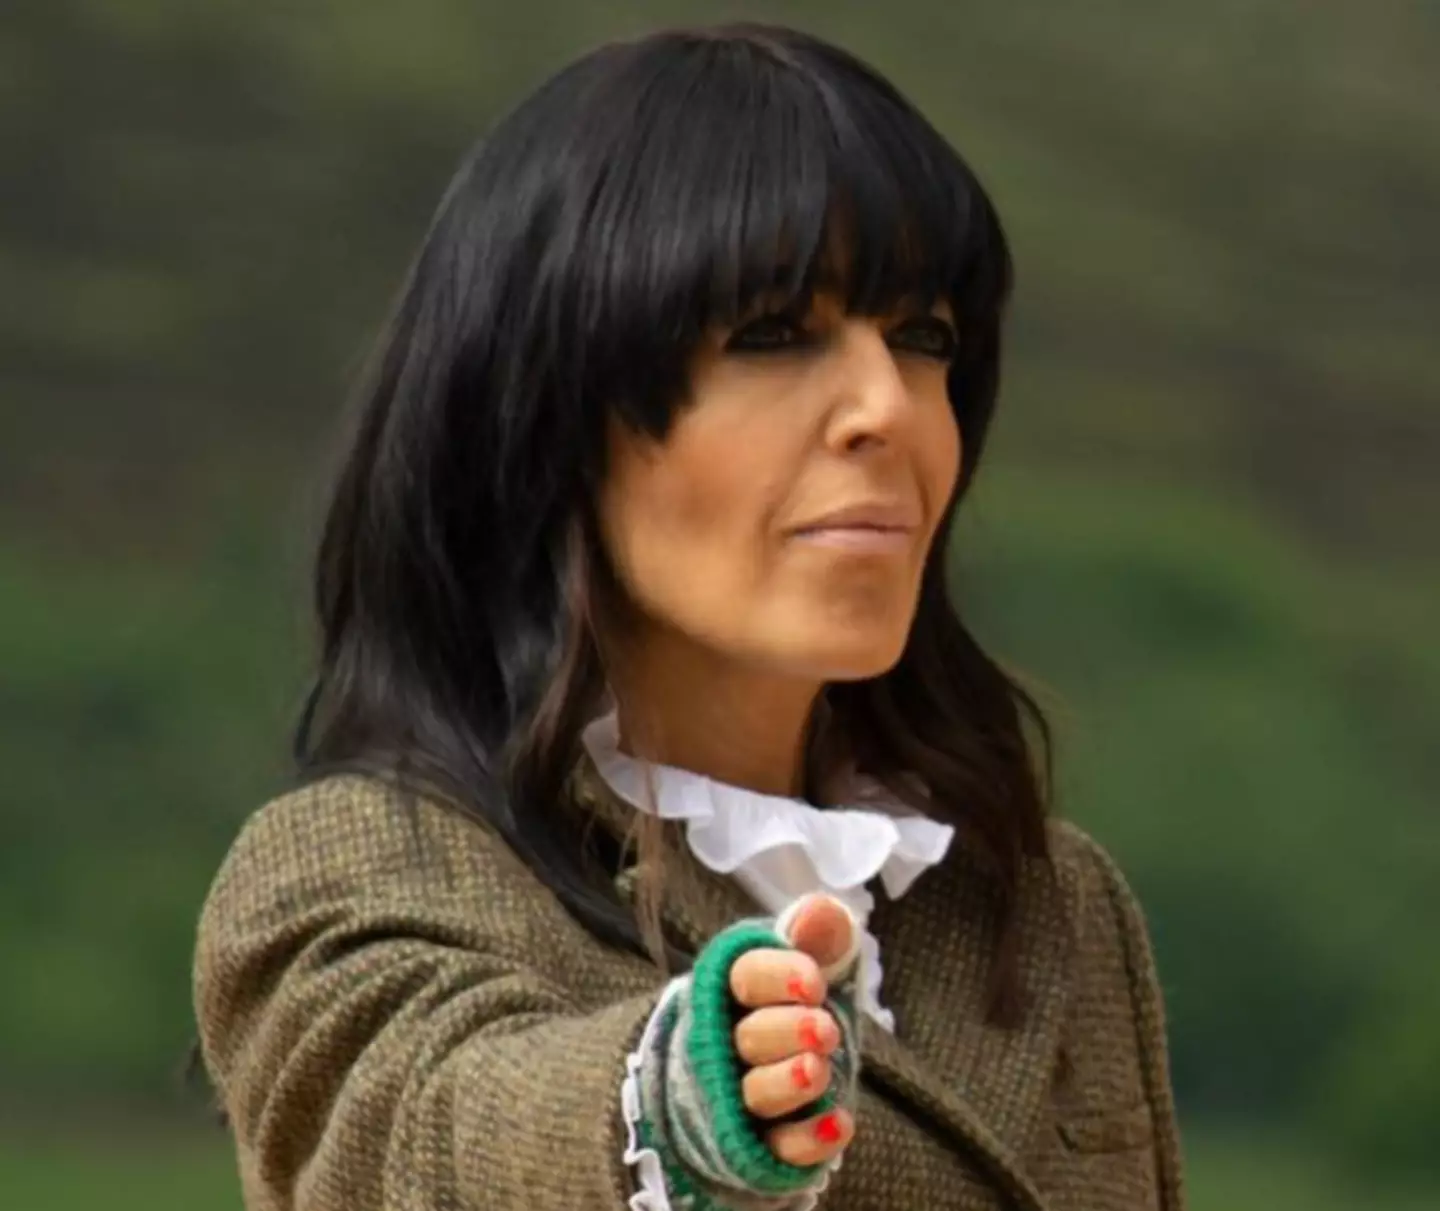 Claudia Winkleman hosts the BBC psychological adventure show.